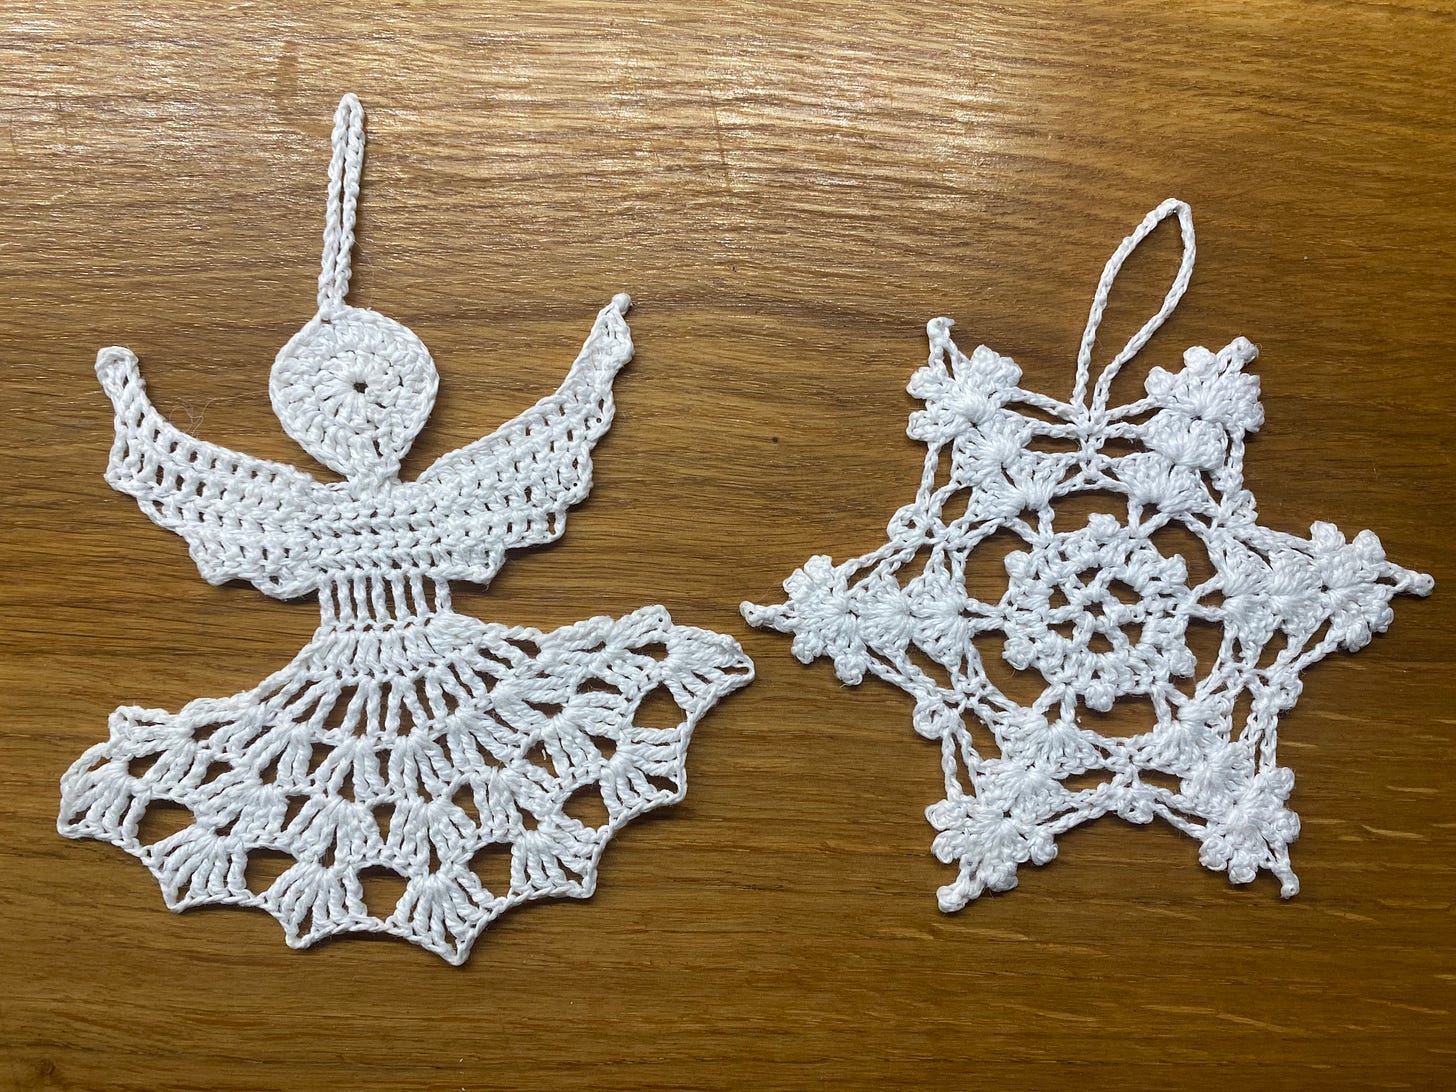 Handmade white christmas tree ornaments of an angel and a snowflake against a wooden table.